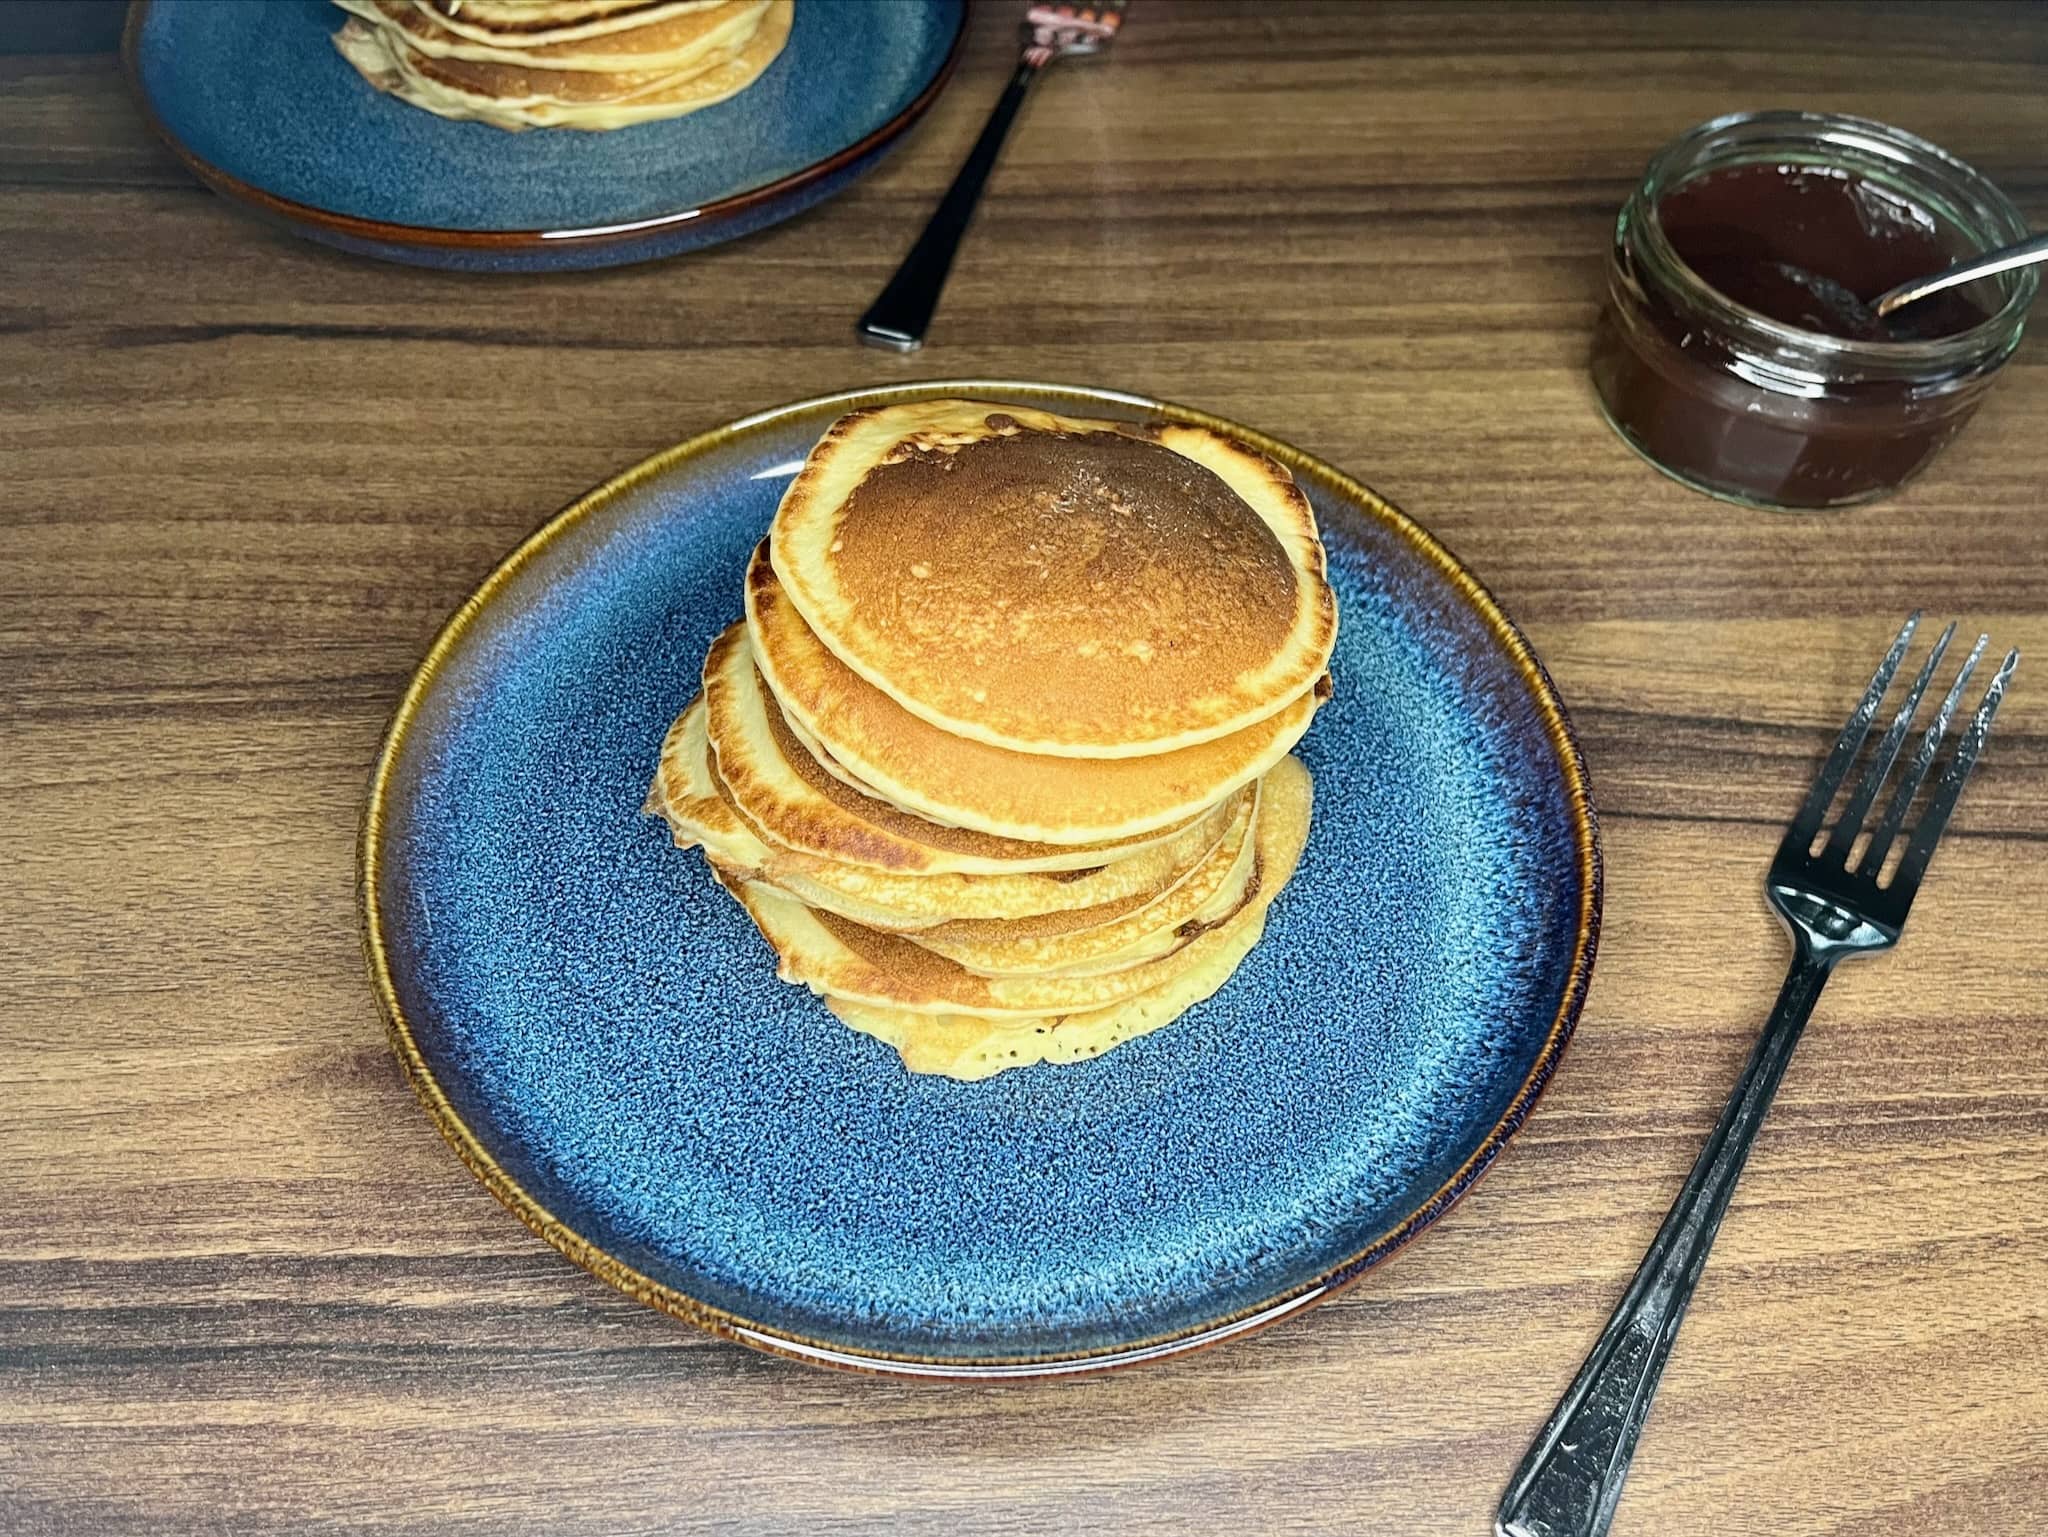 American pancakes in stack on a plate with jam on a side